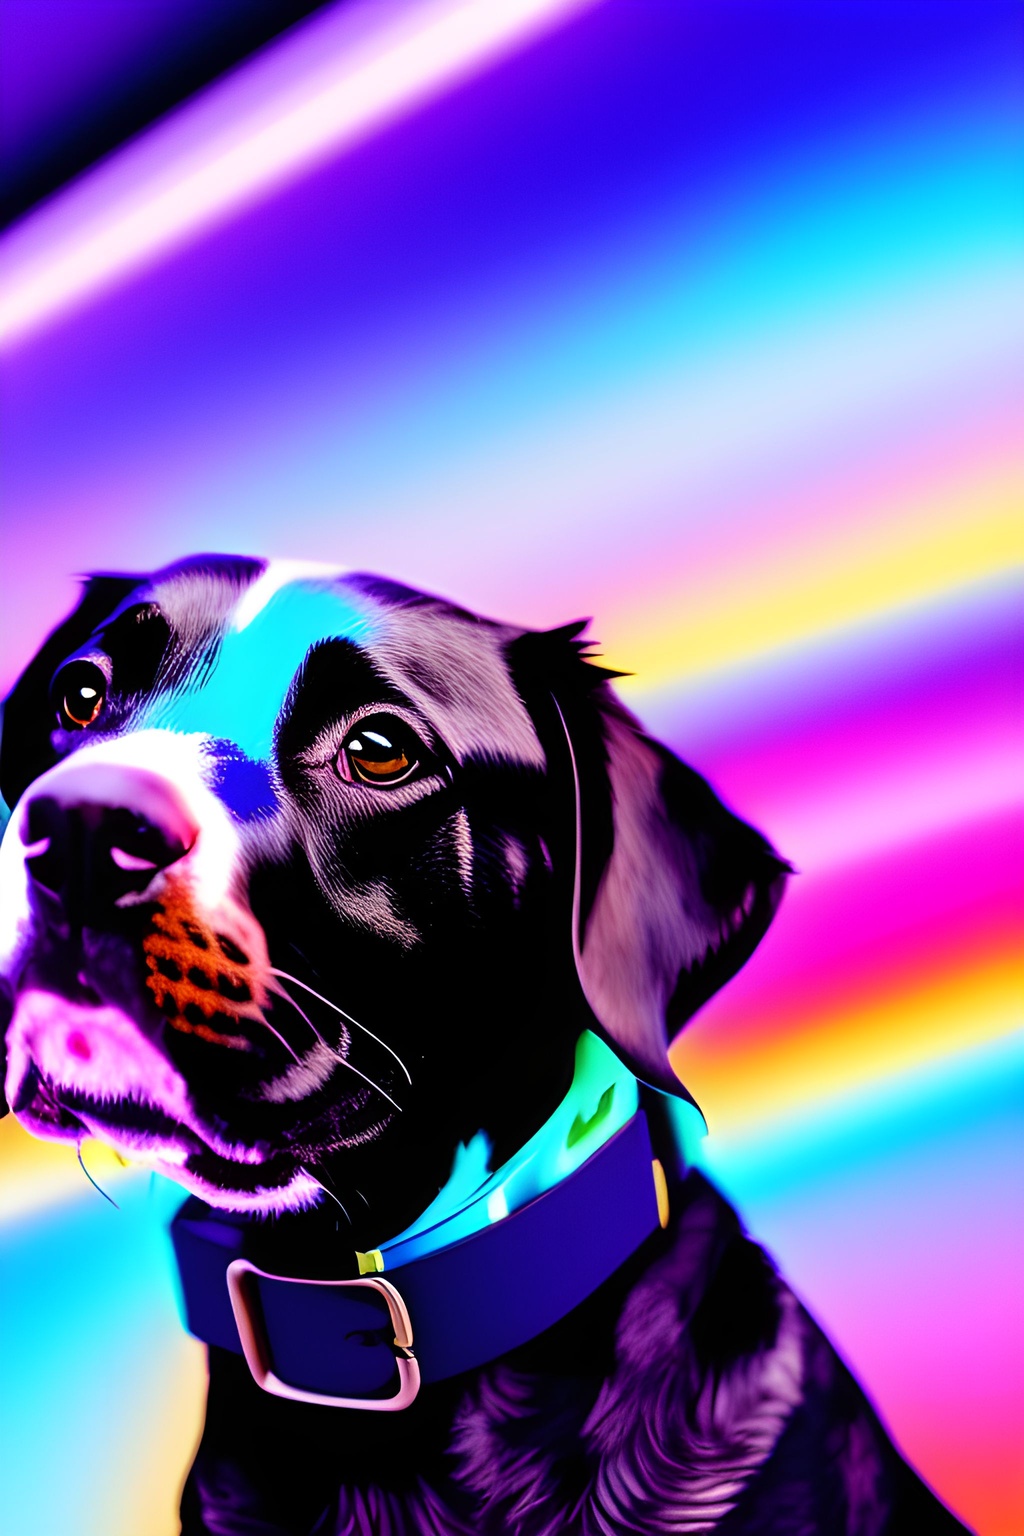 Prompt: abstract_design_vivid_colors__highly_detailed__cartoon_style_dog_Portrait__centered__highly_detailed_Seed-1321322_Steps-35_Guidance-12.1